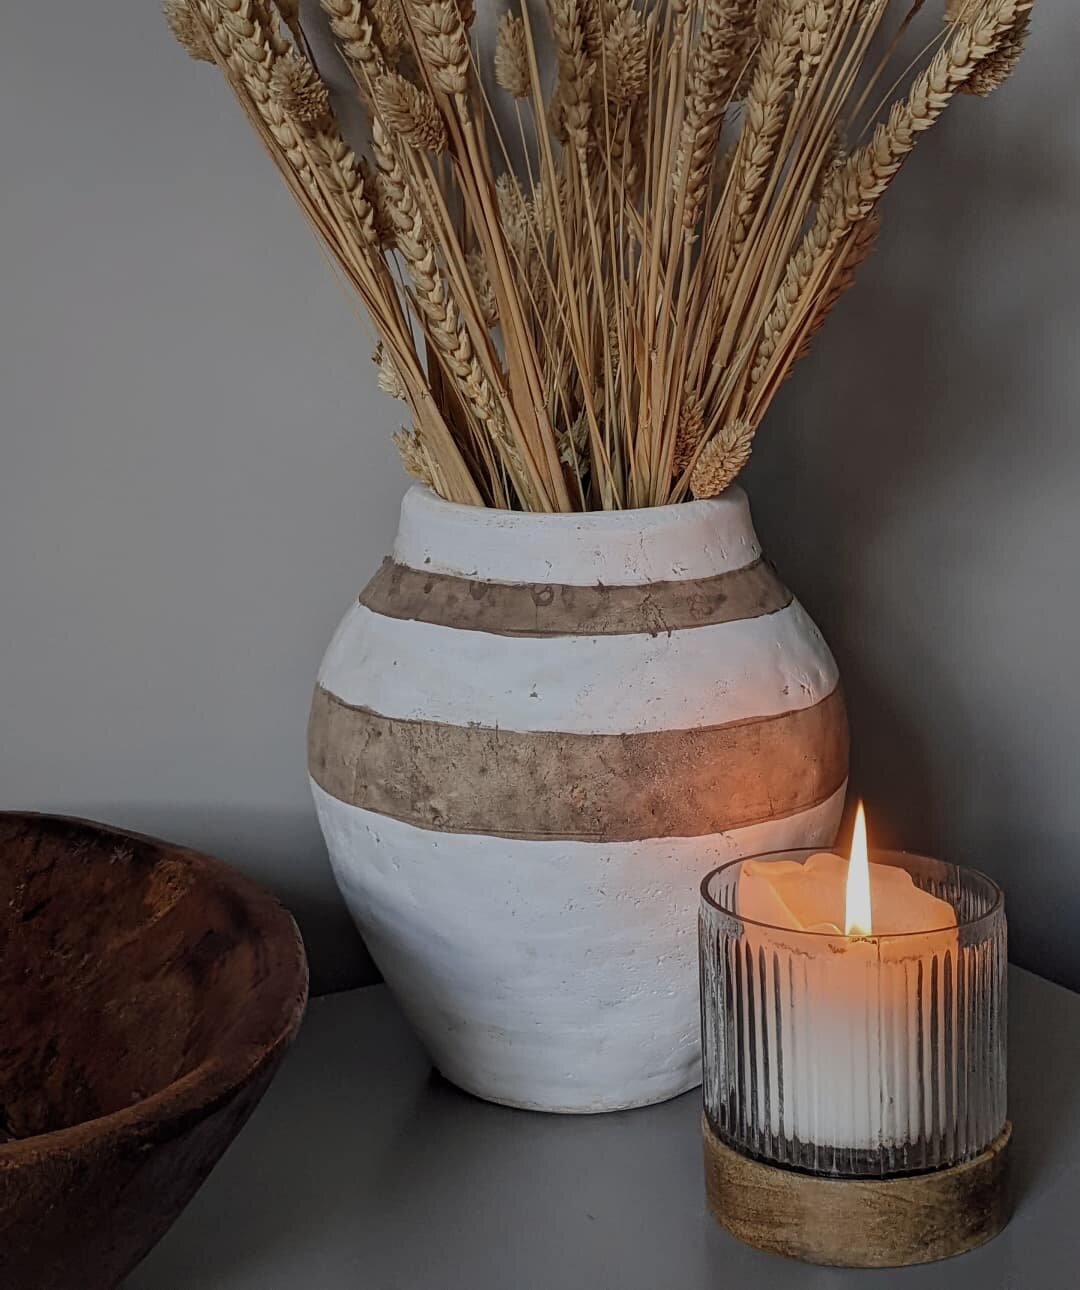 Friday Feeling 🤎 Who else is looking forward to lighting some candles and chilling this weekend! 

Products Featured:
Stripe terracotta vase
Ribbed Candle holder

#oakandolivehome #friday #fridayfeeling #rustic #rusticdecor #natural #organic #moody